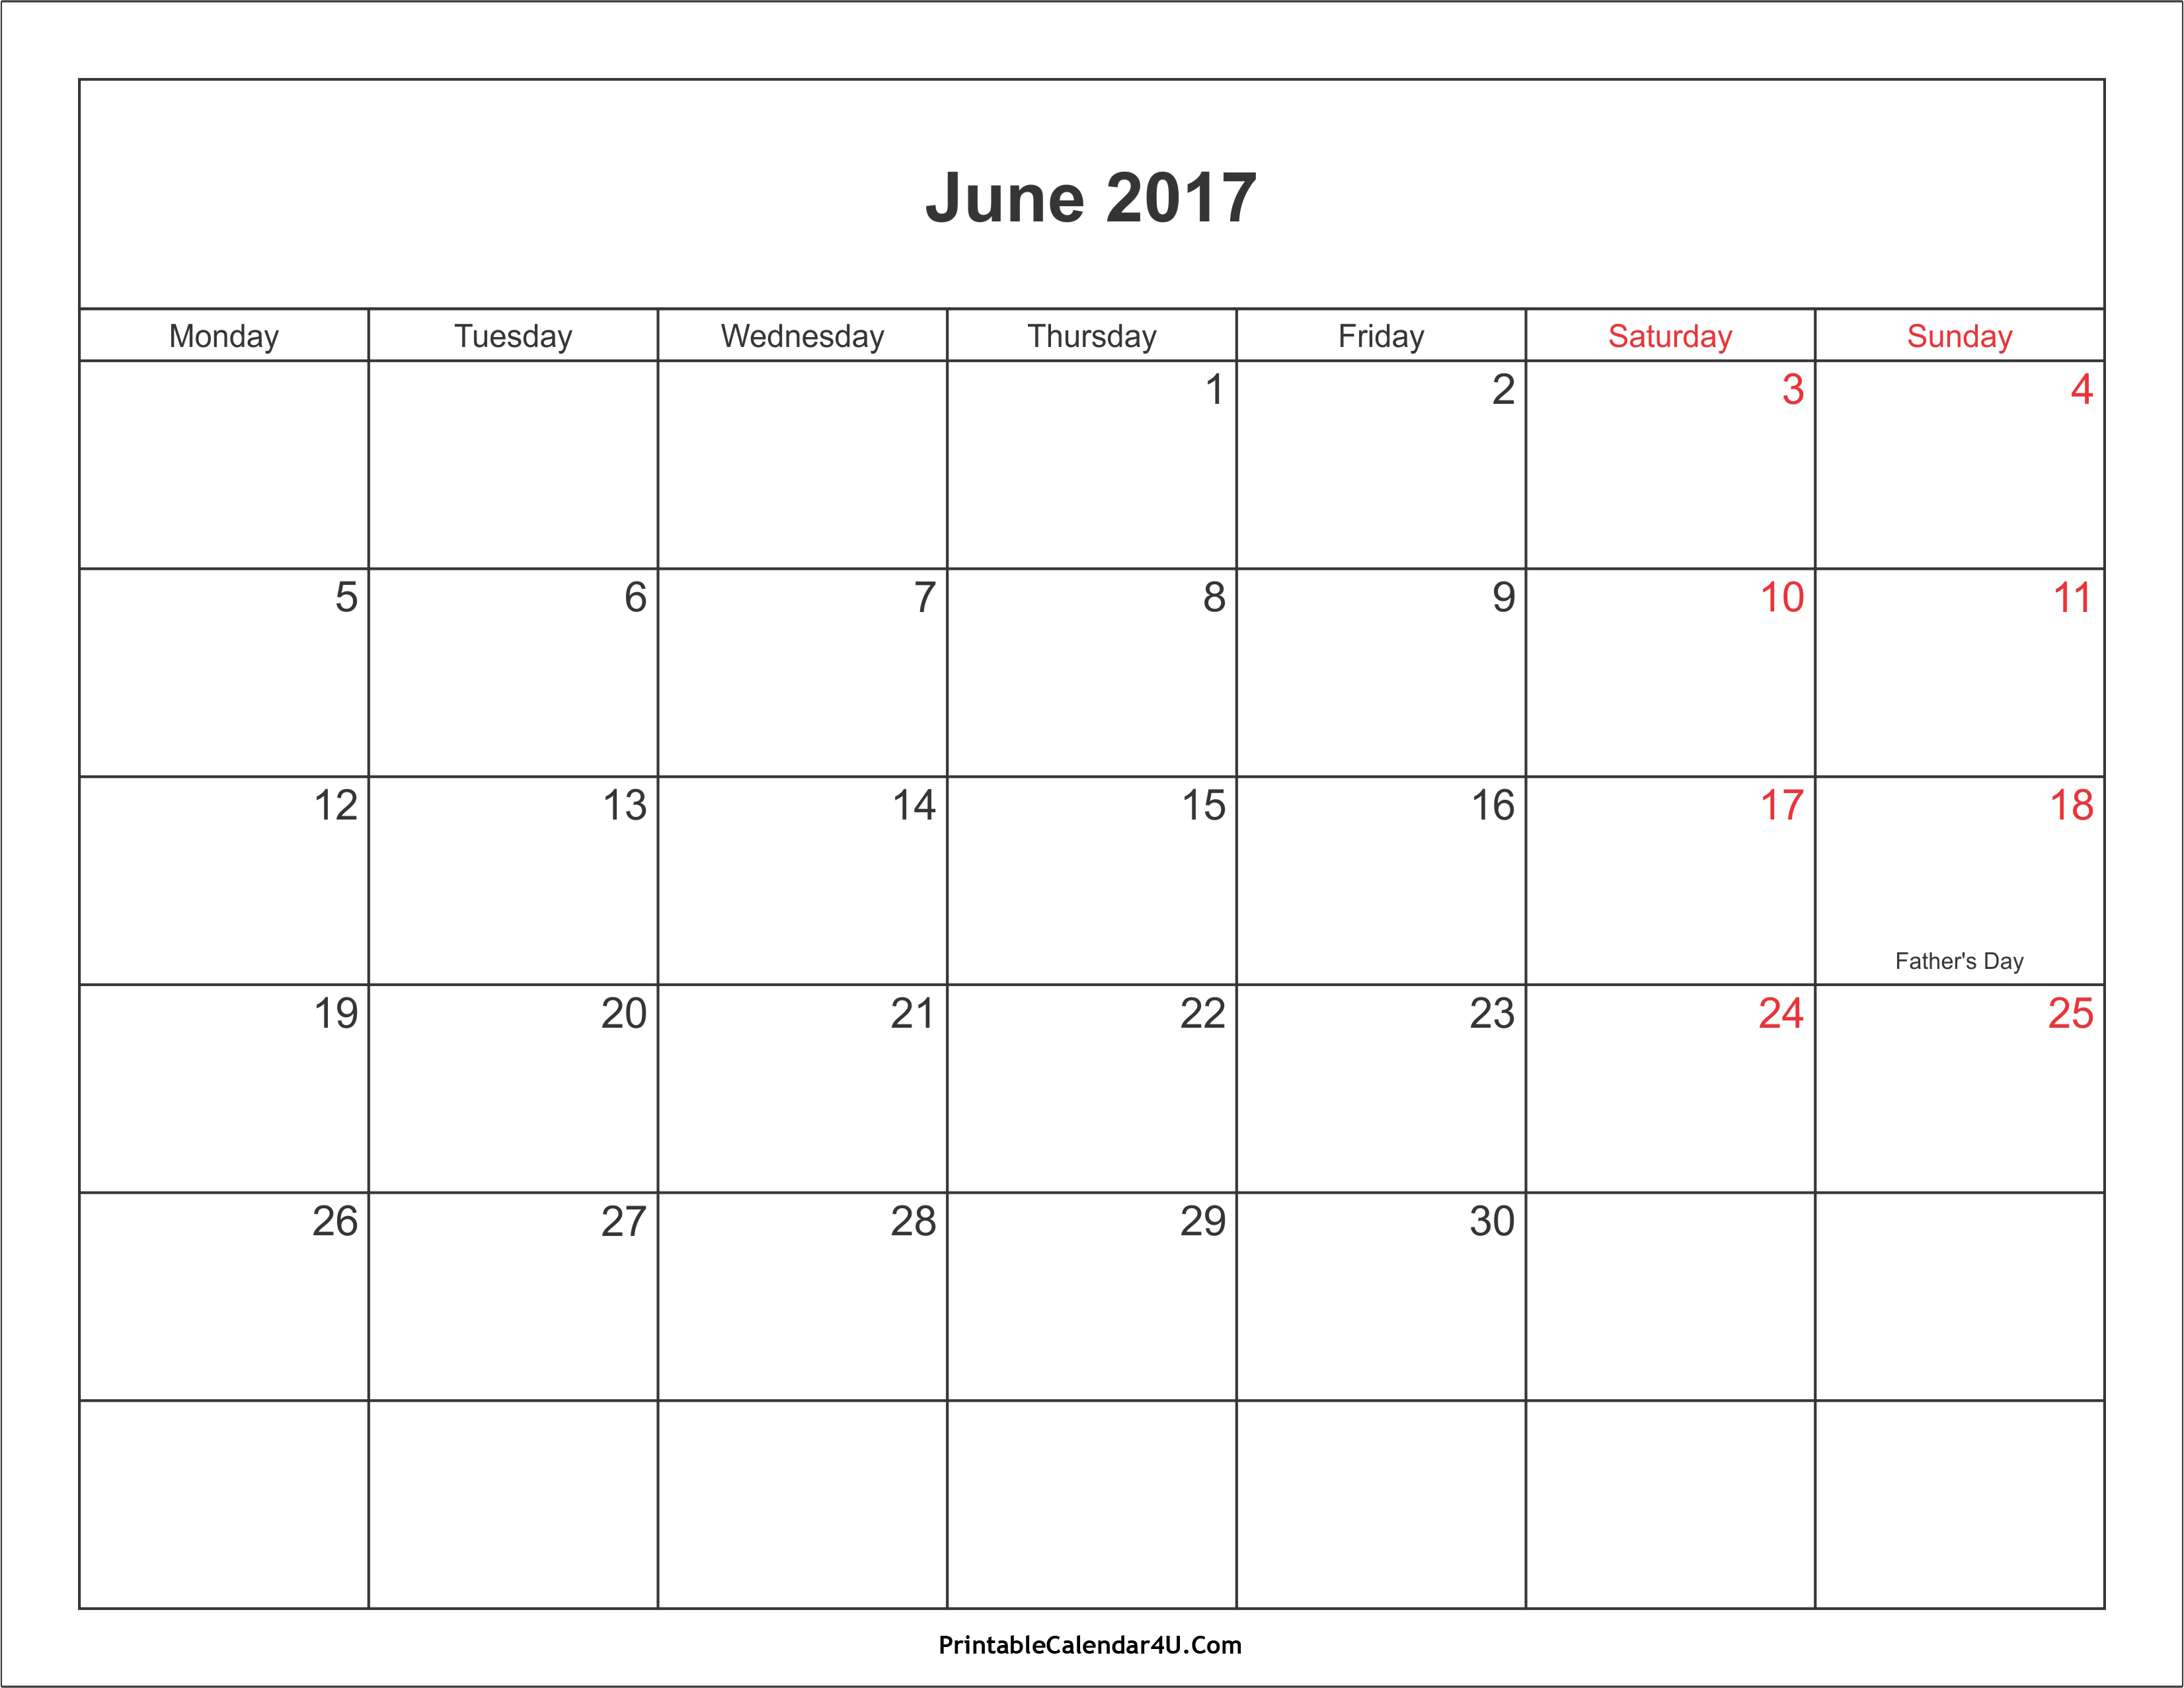 June 2017 Calendar Printable with Holidays PDF and 